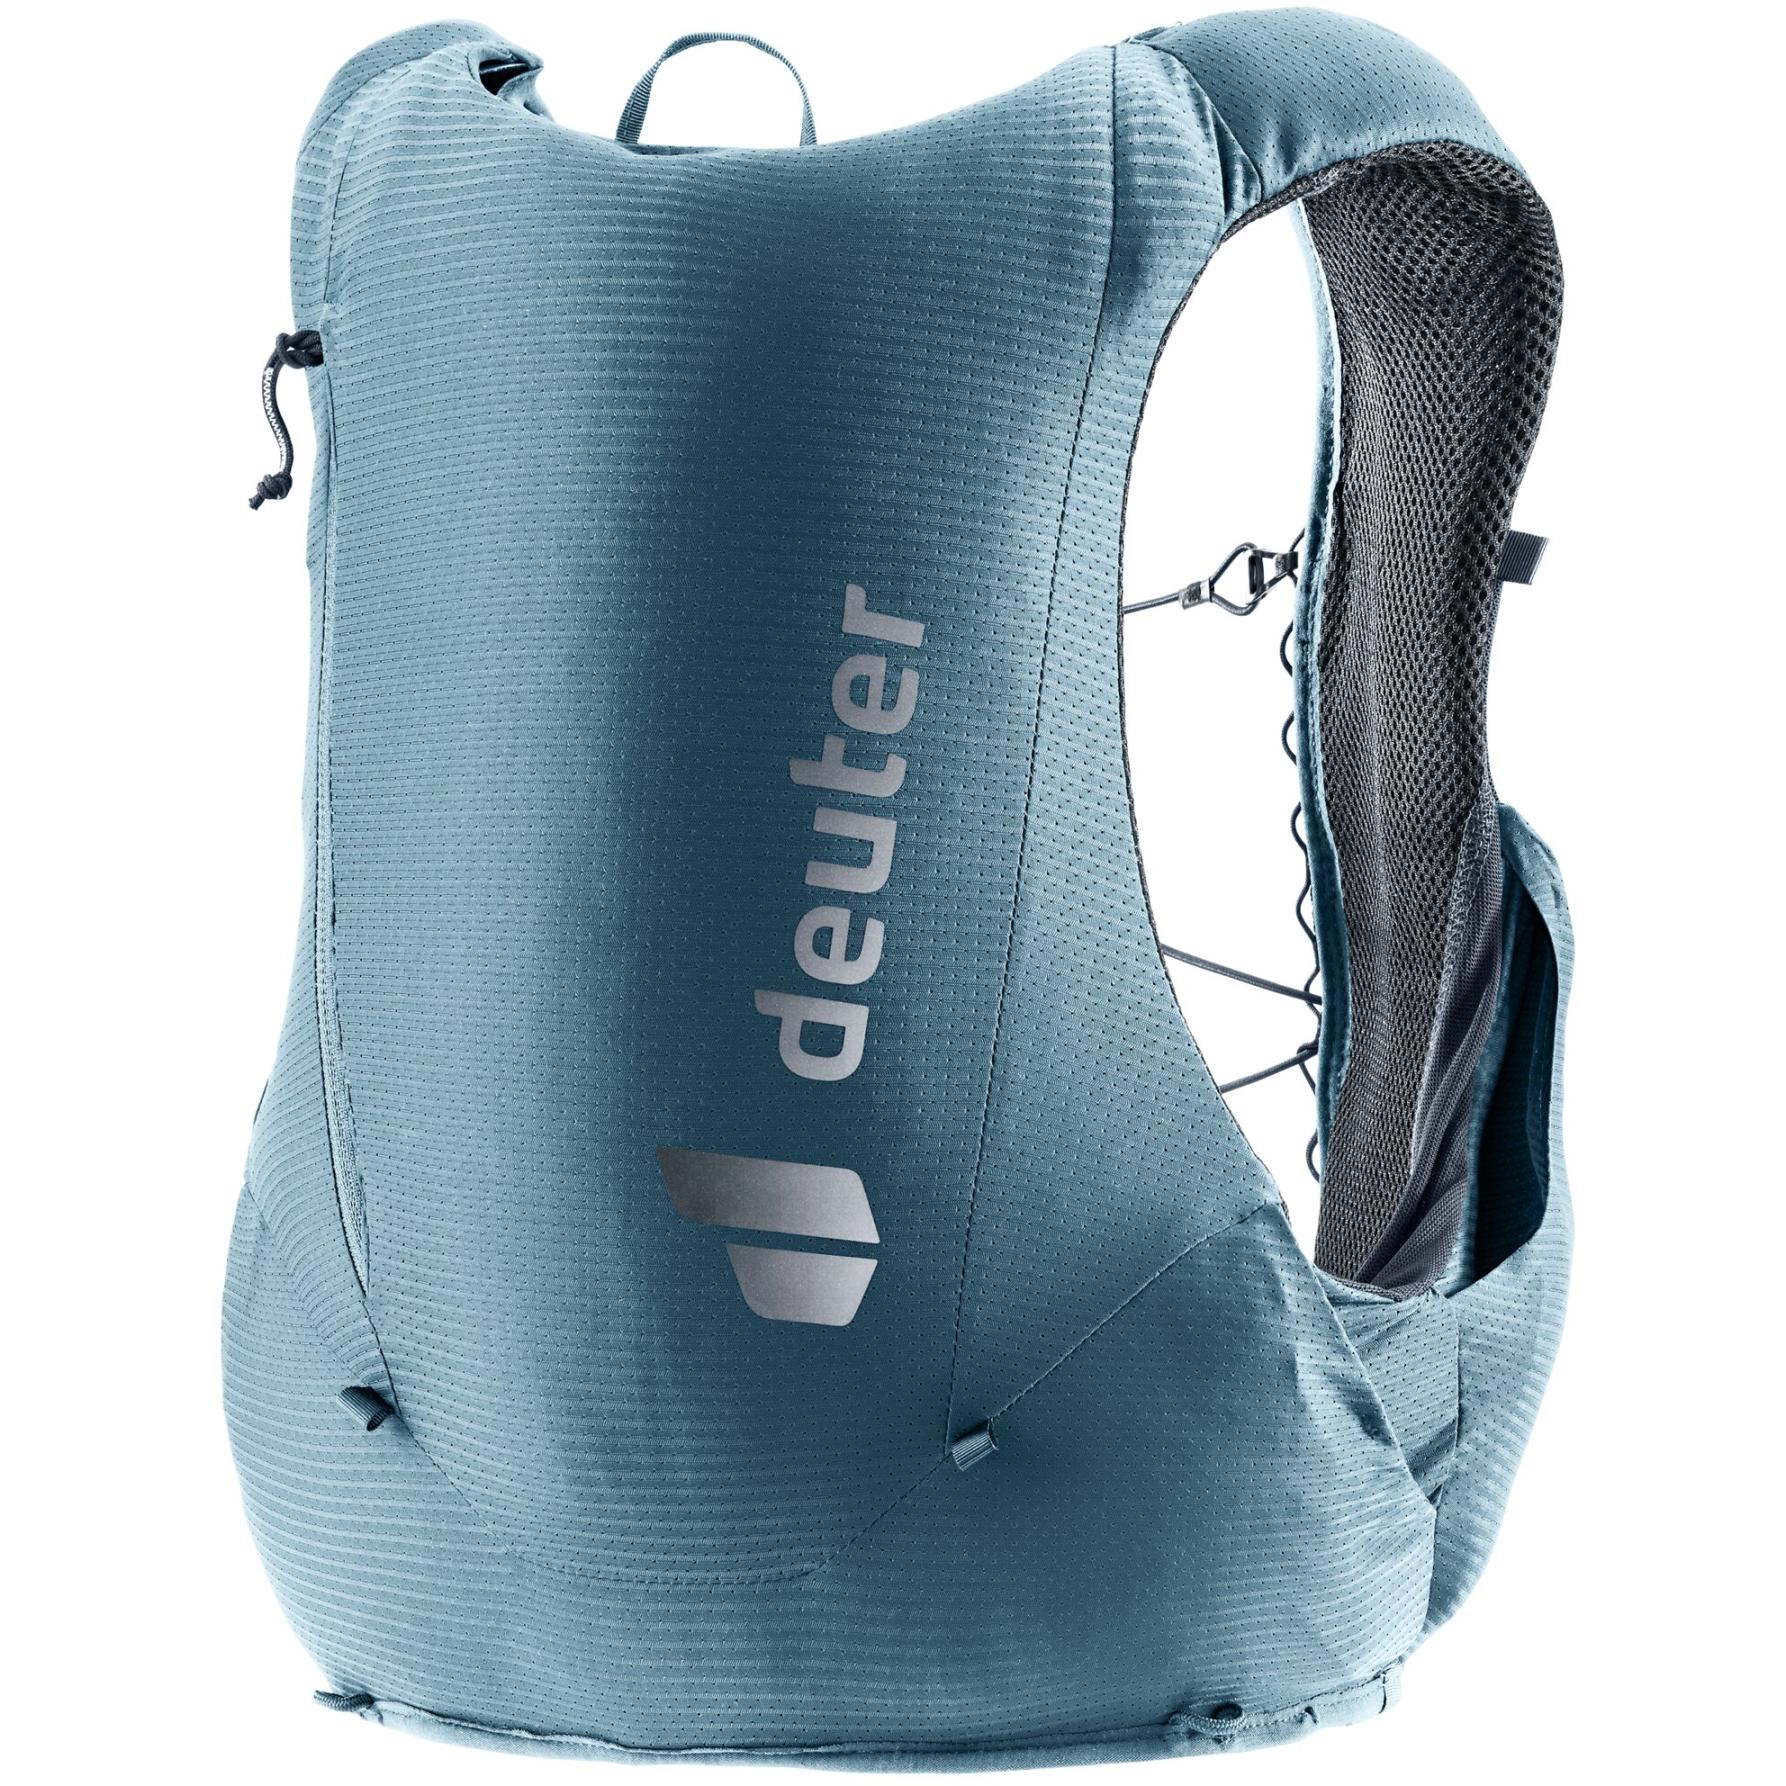 Picture of Deuter Traick 5 Trailrunning Backpack - Small - atlantic-ink